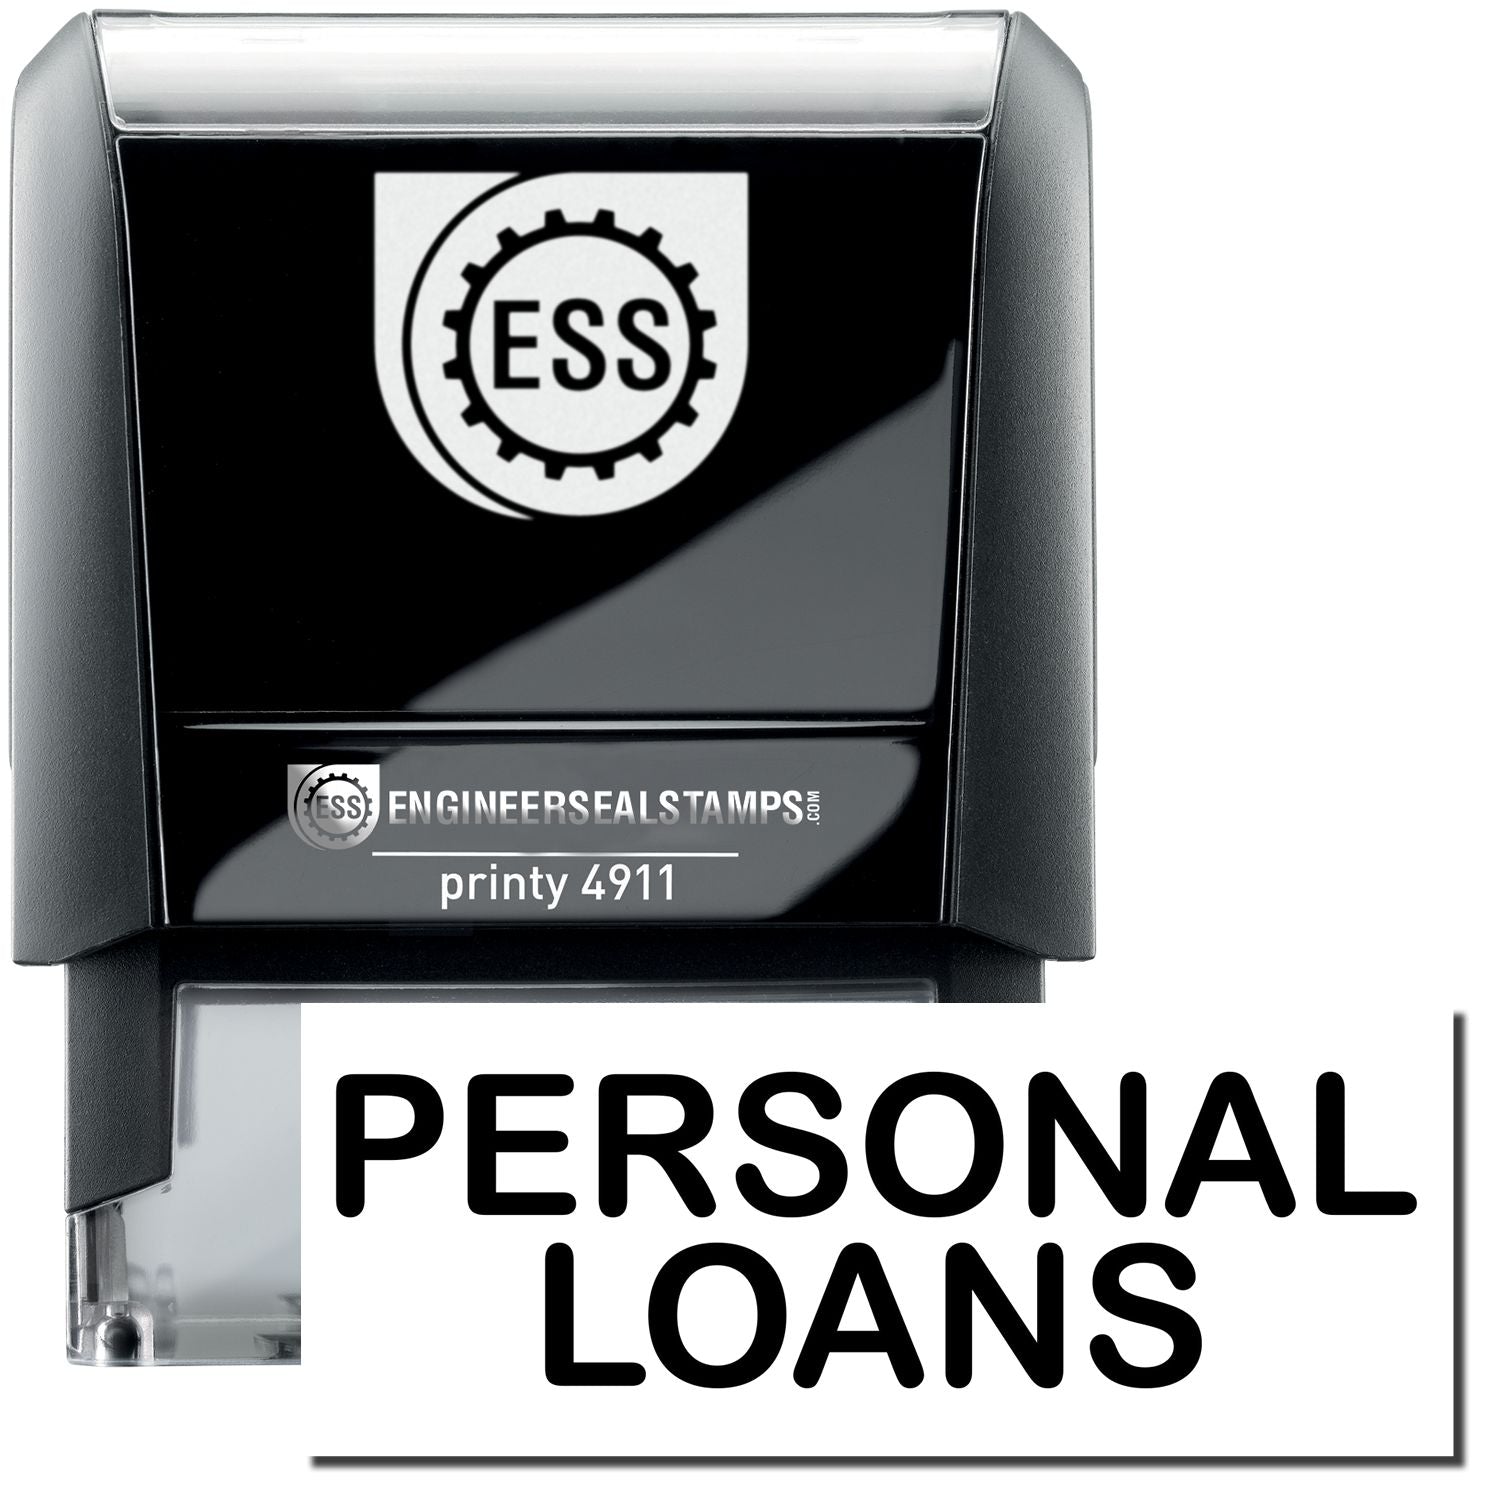 A self-inking stamp with a stamped image showing how the text "PERSONAL LOANS" is displayed after stamping.